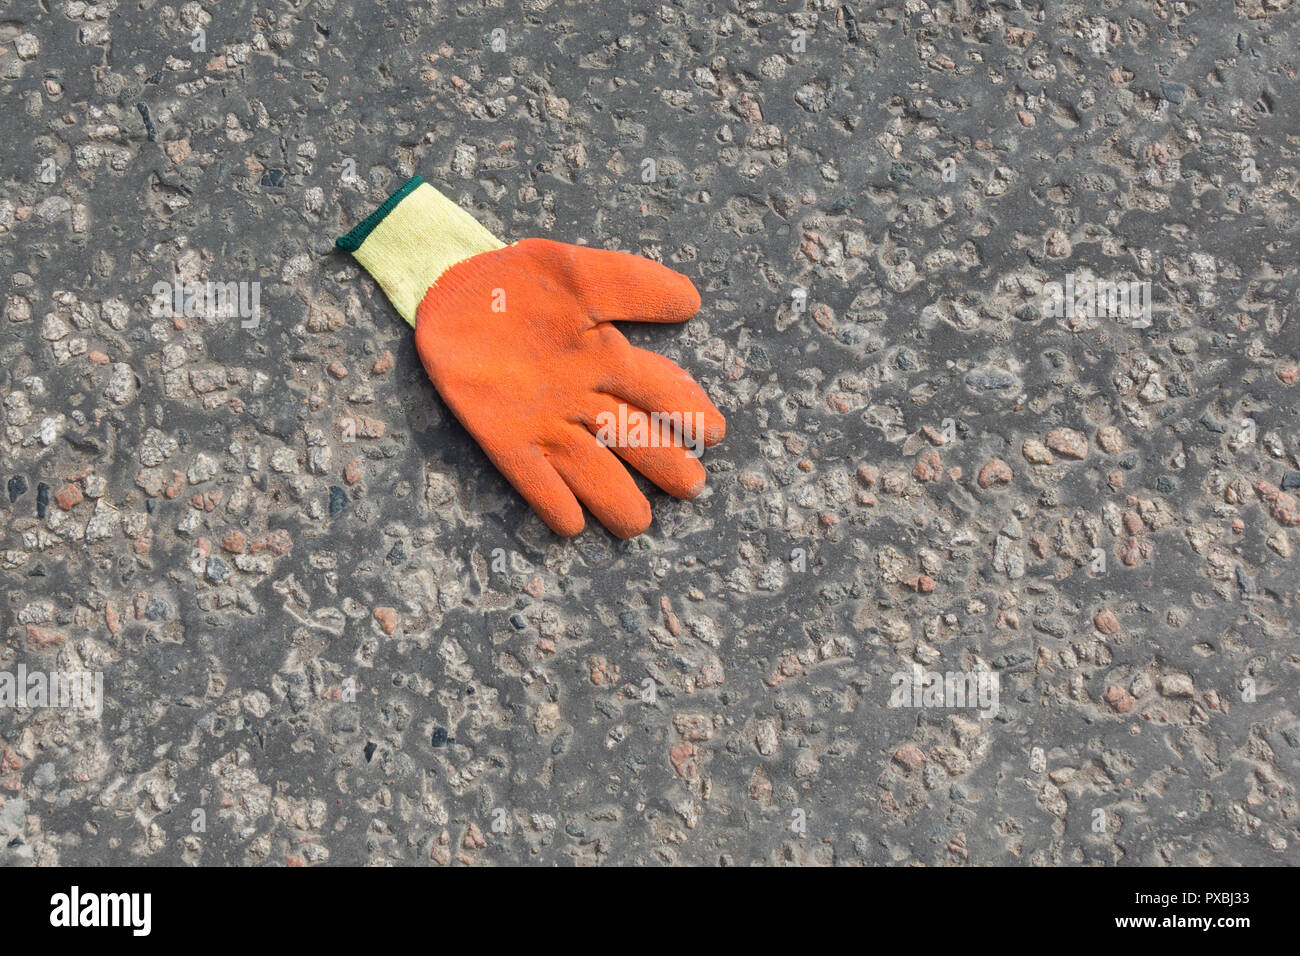 dropped workmans or workpersons glove in road - uk Stock Photo